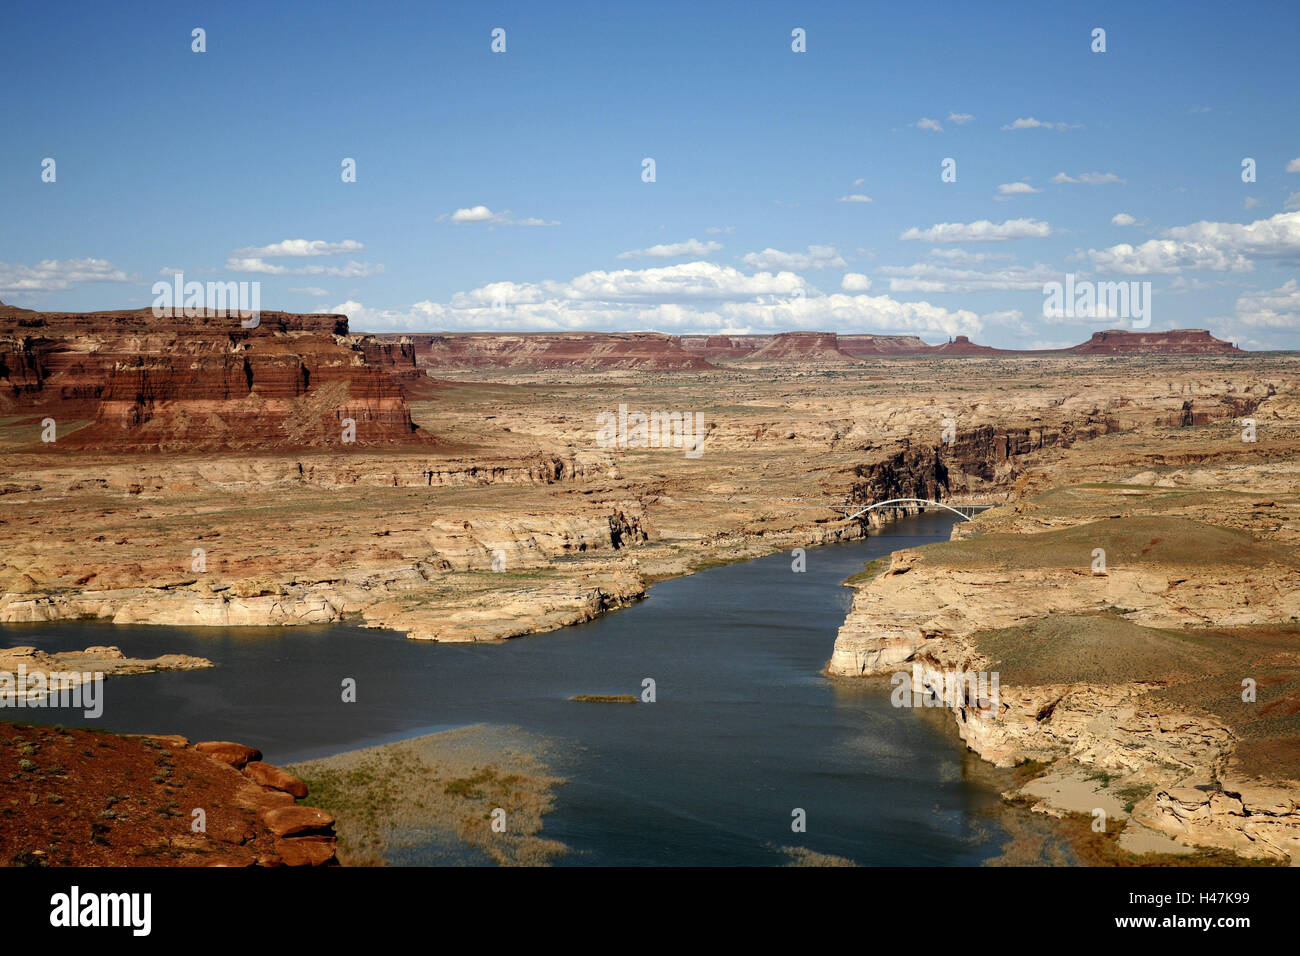 The USA, Utah, Hite, overview, view, view, scenery, nature, Colorado, bridge, rock, bile formations, red, heaven, clouds, travel, on the way, sightseeing, vacation, holidays, rest, camping, reservoir, Stock Photo